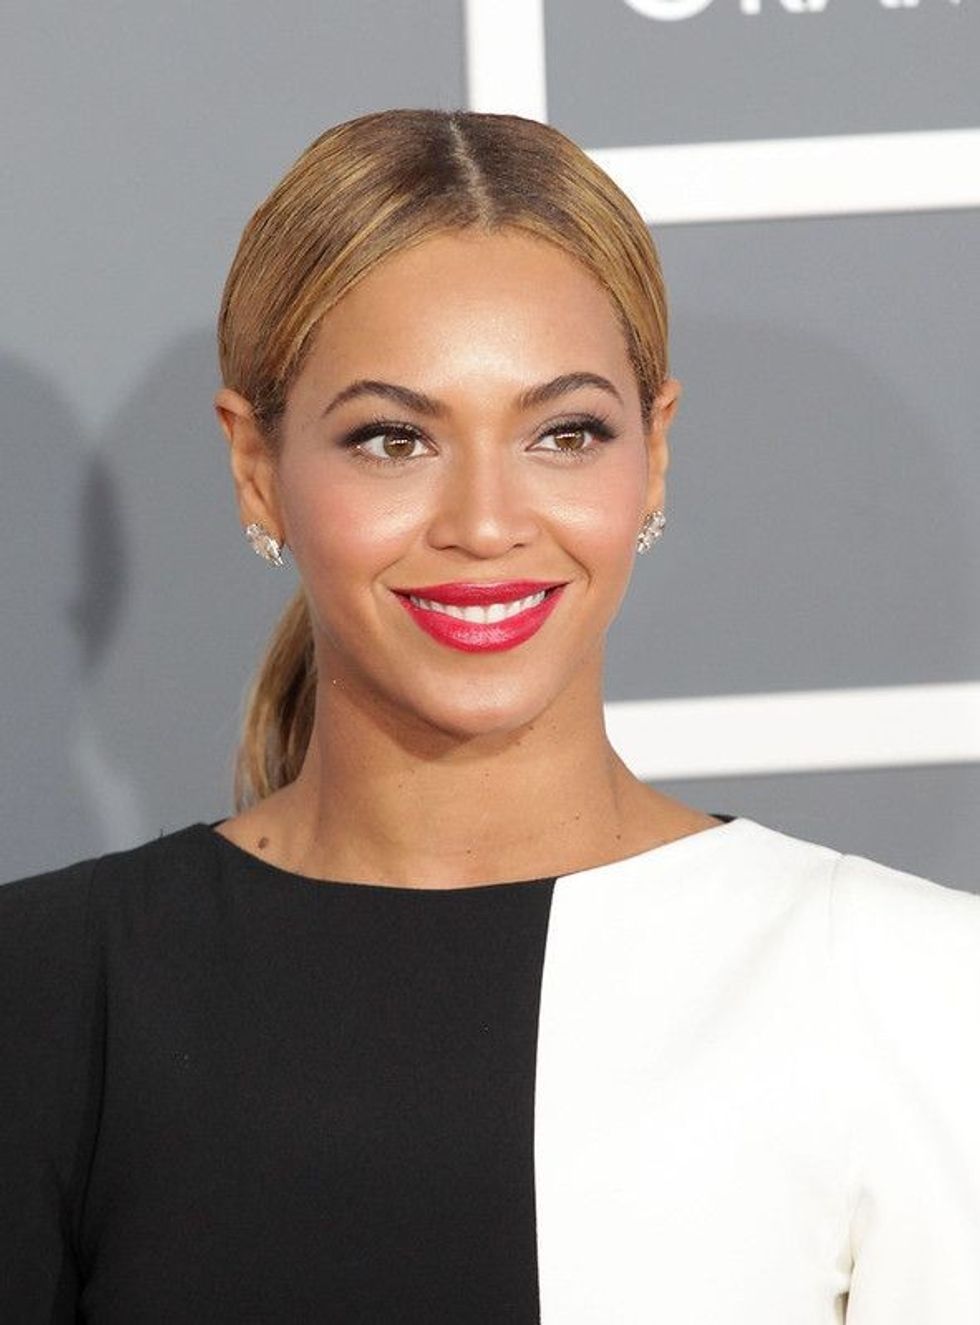 Candid picture of Beyoncé from an event.